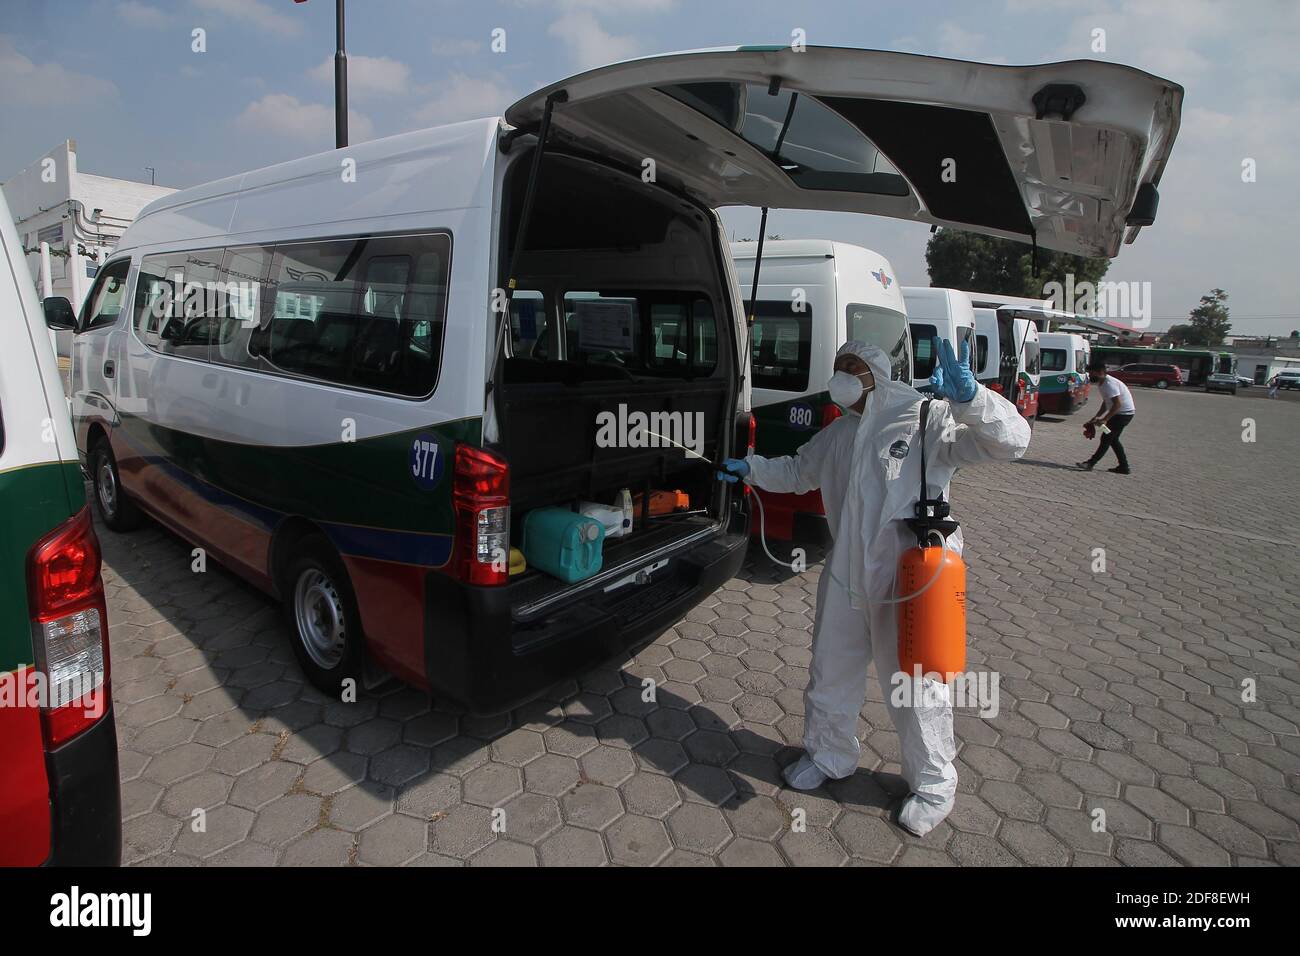 MEXICO CITY, MEXICO - DECEMBER 1: A person wears personal protective equipment suit to spray disinfectant solution on a bus station as safety measure amid the New Covid-19 pandemic as Mexico reaches 1,113,543 cases for Covid-19 on December 1, 2020 in Mexico City, Mexico. Credit: Ricardo Castelan Cruz/Eyepix Group/The Photo Access Stock Photo